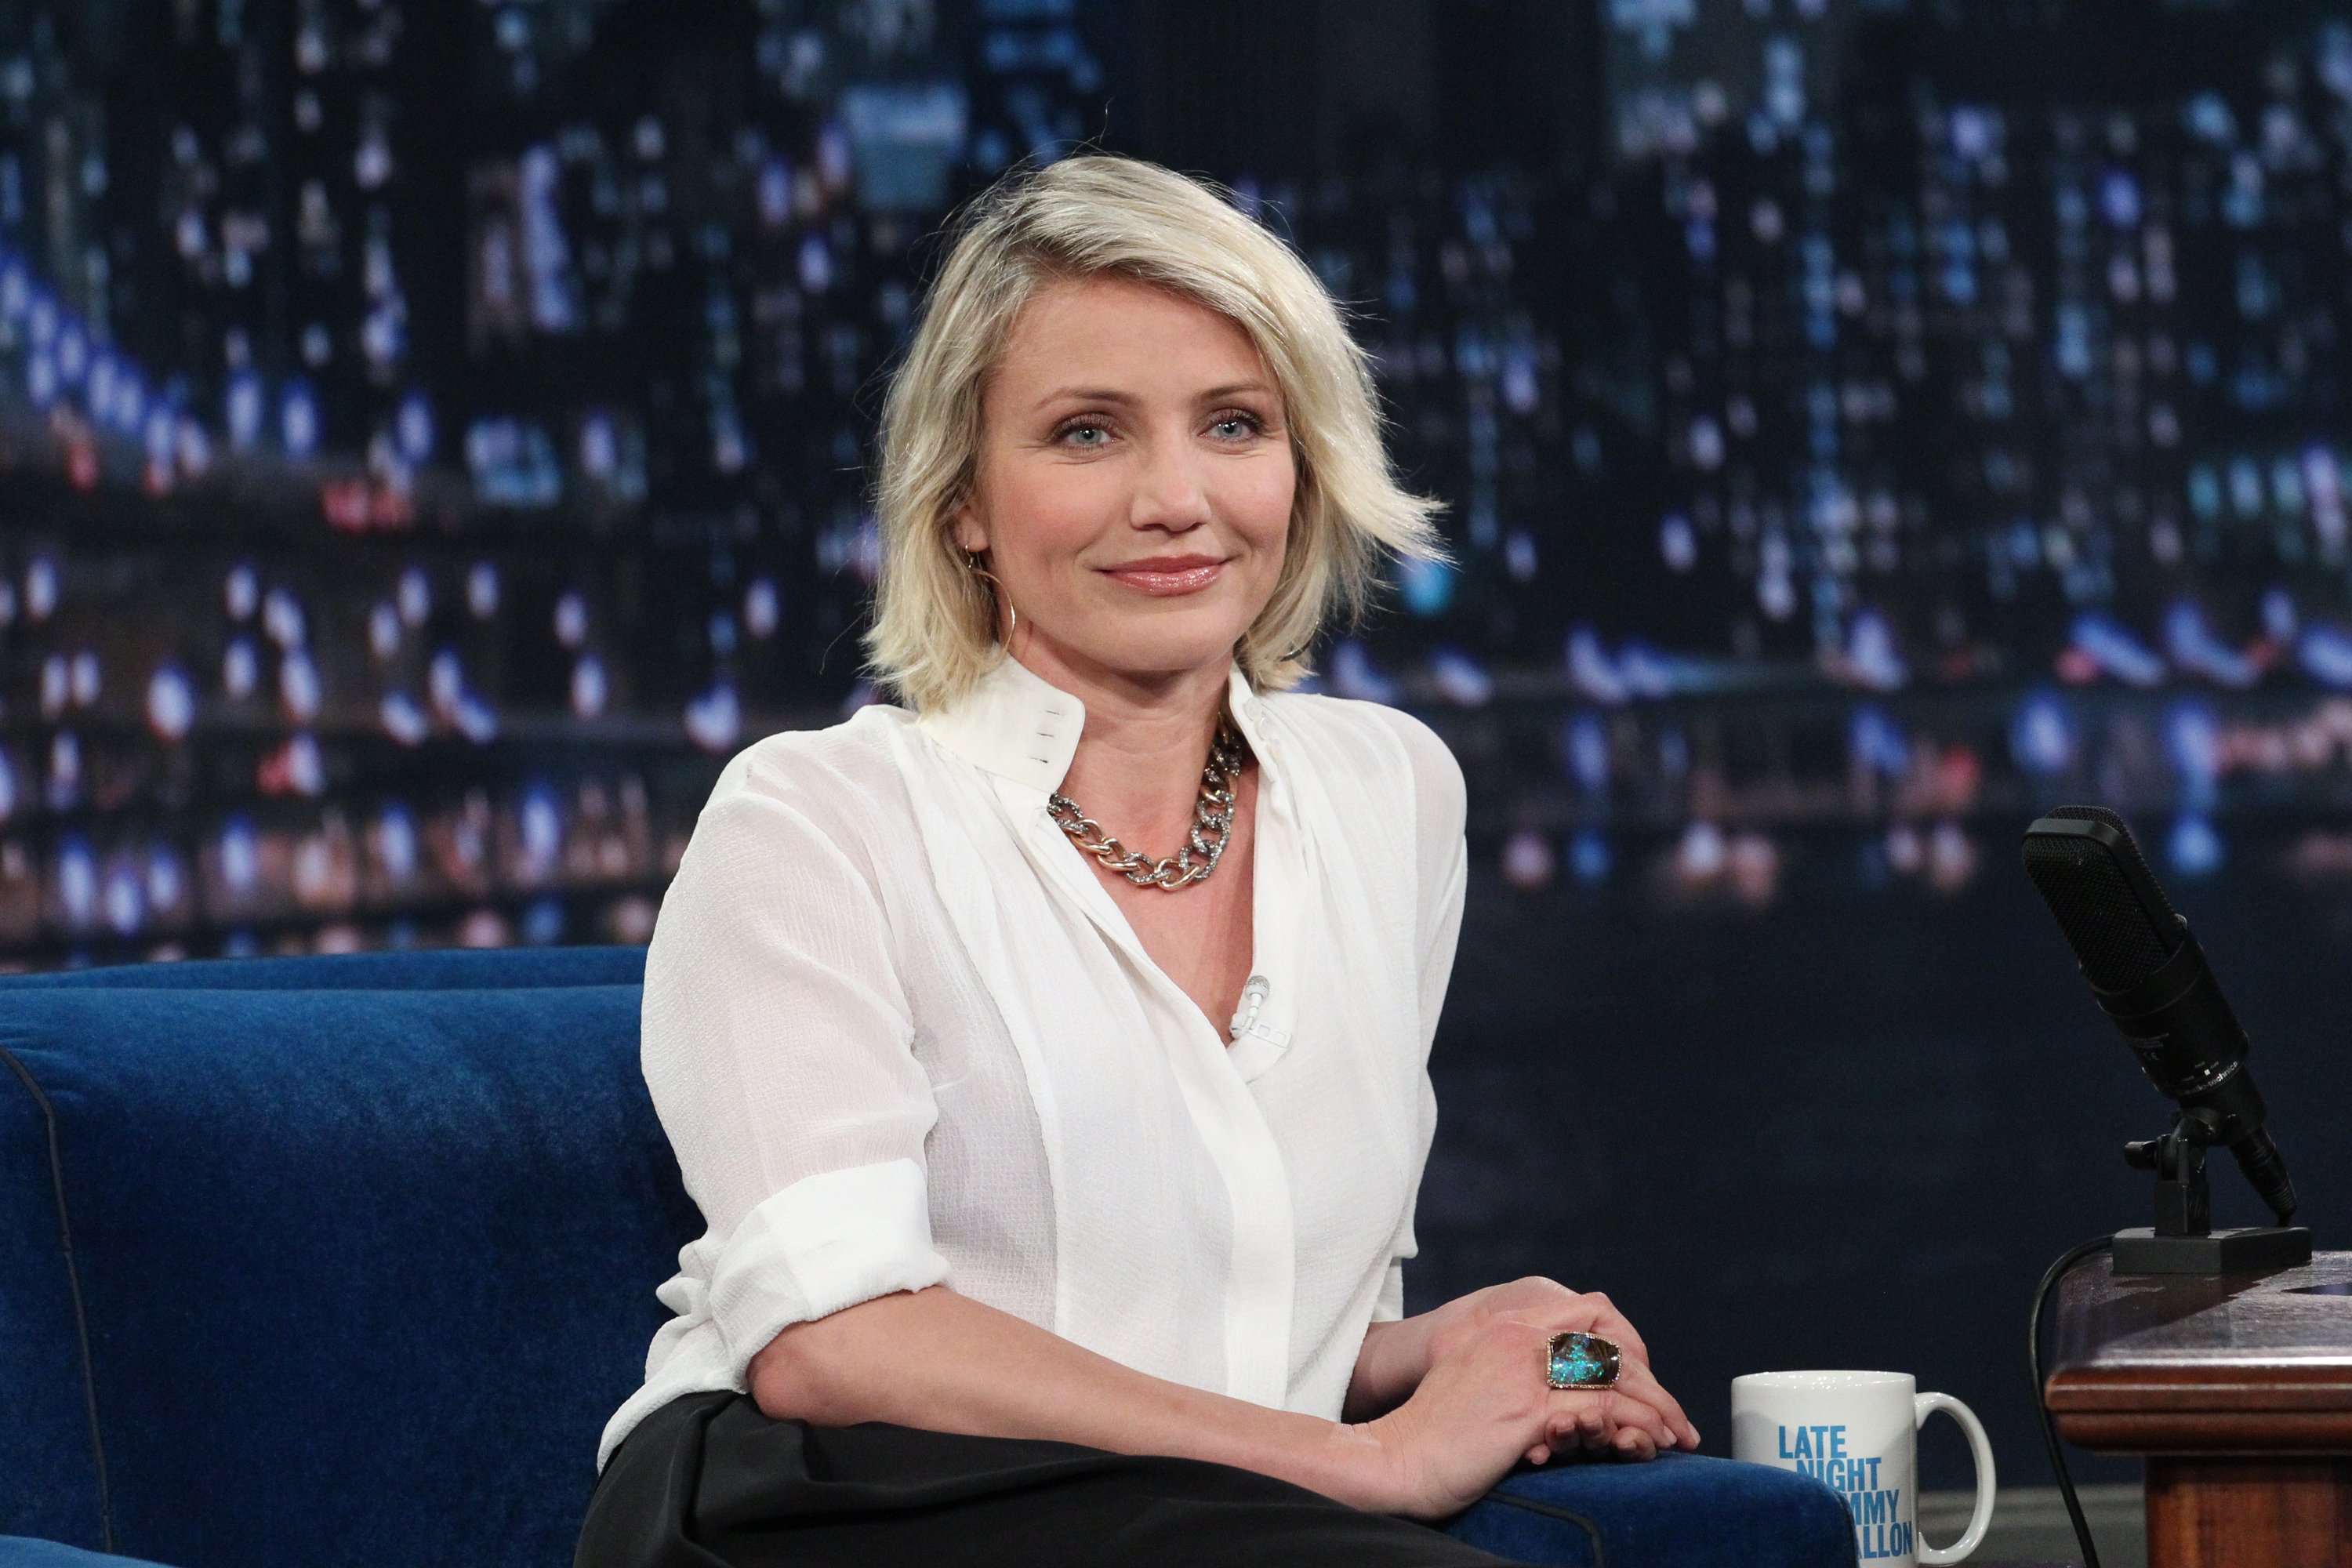 Cameron Diaz on an episode of "Late Night with Jimmy Fallon" on May 8, 2012. | Source: Getty Images